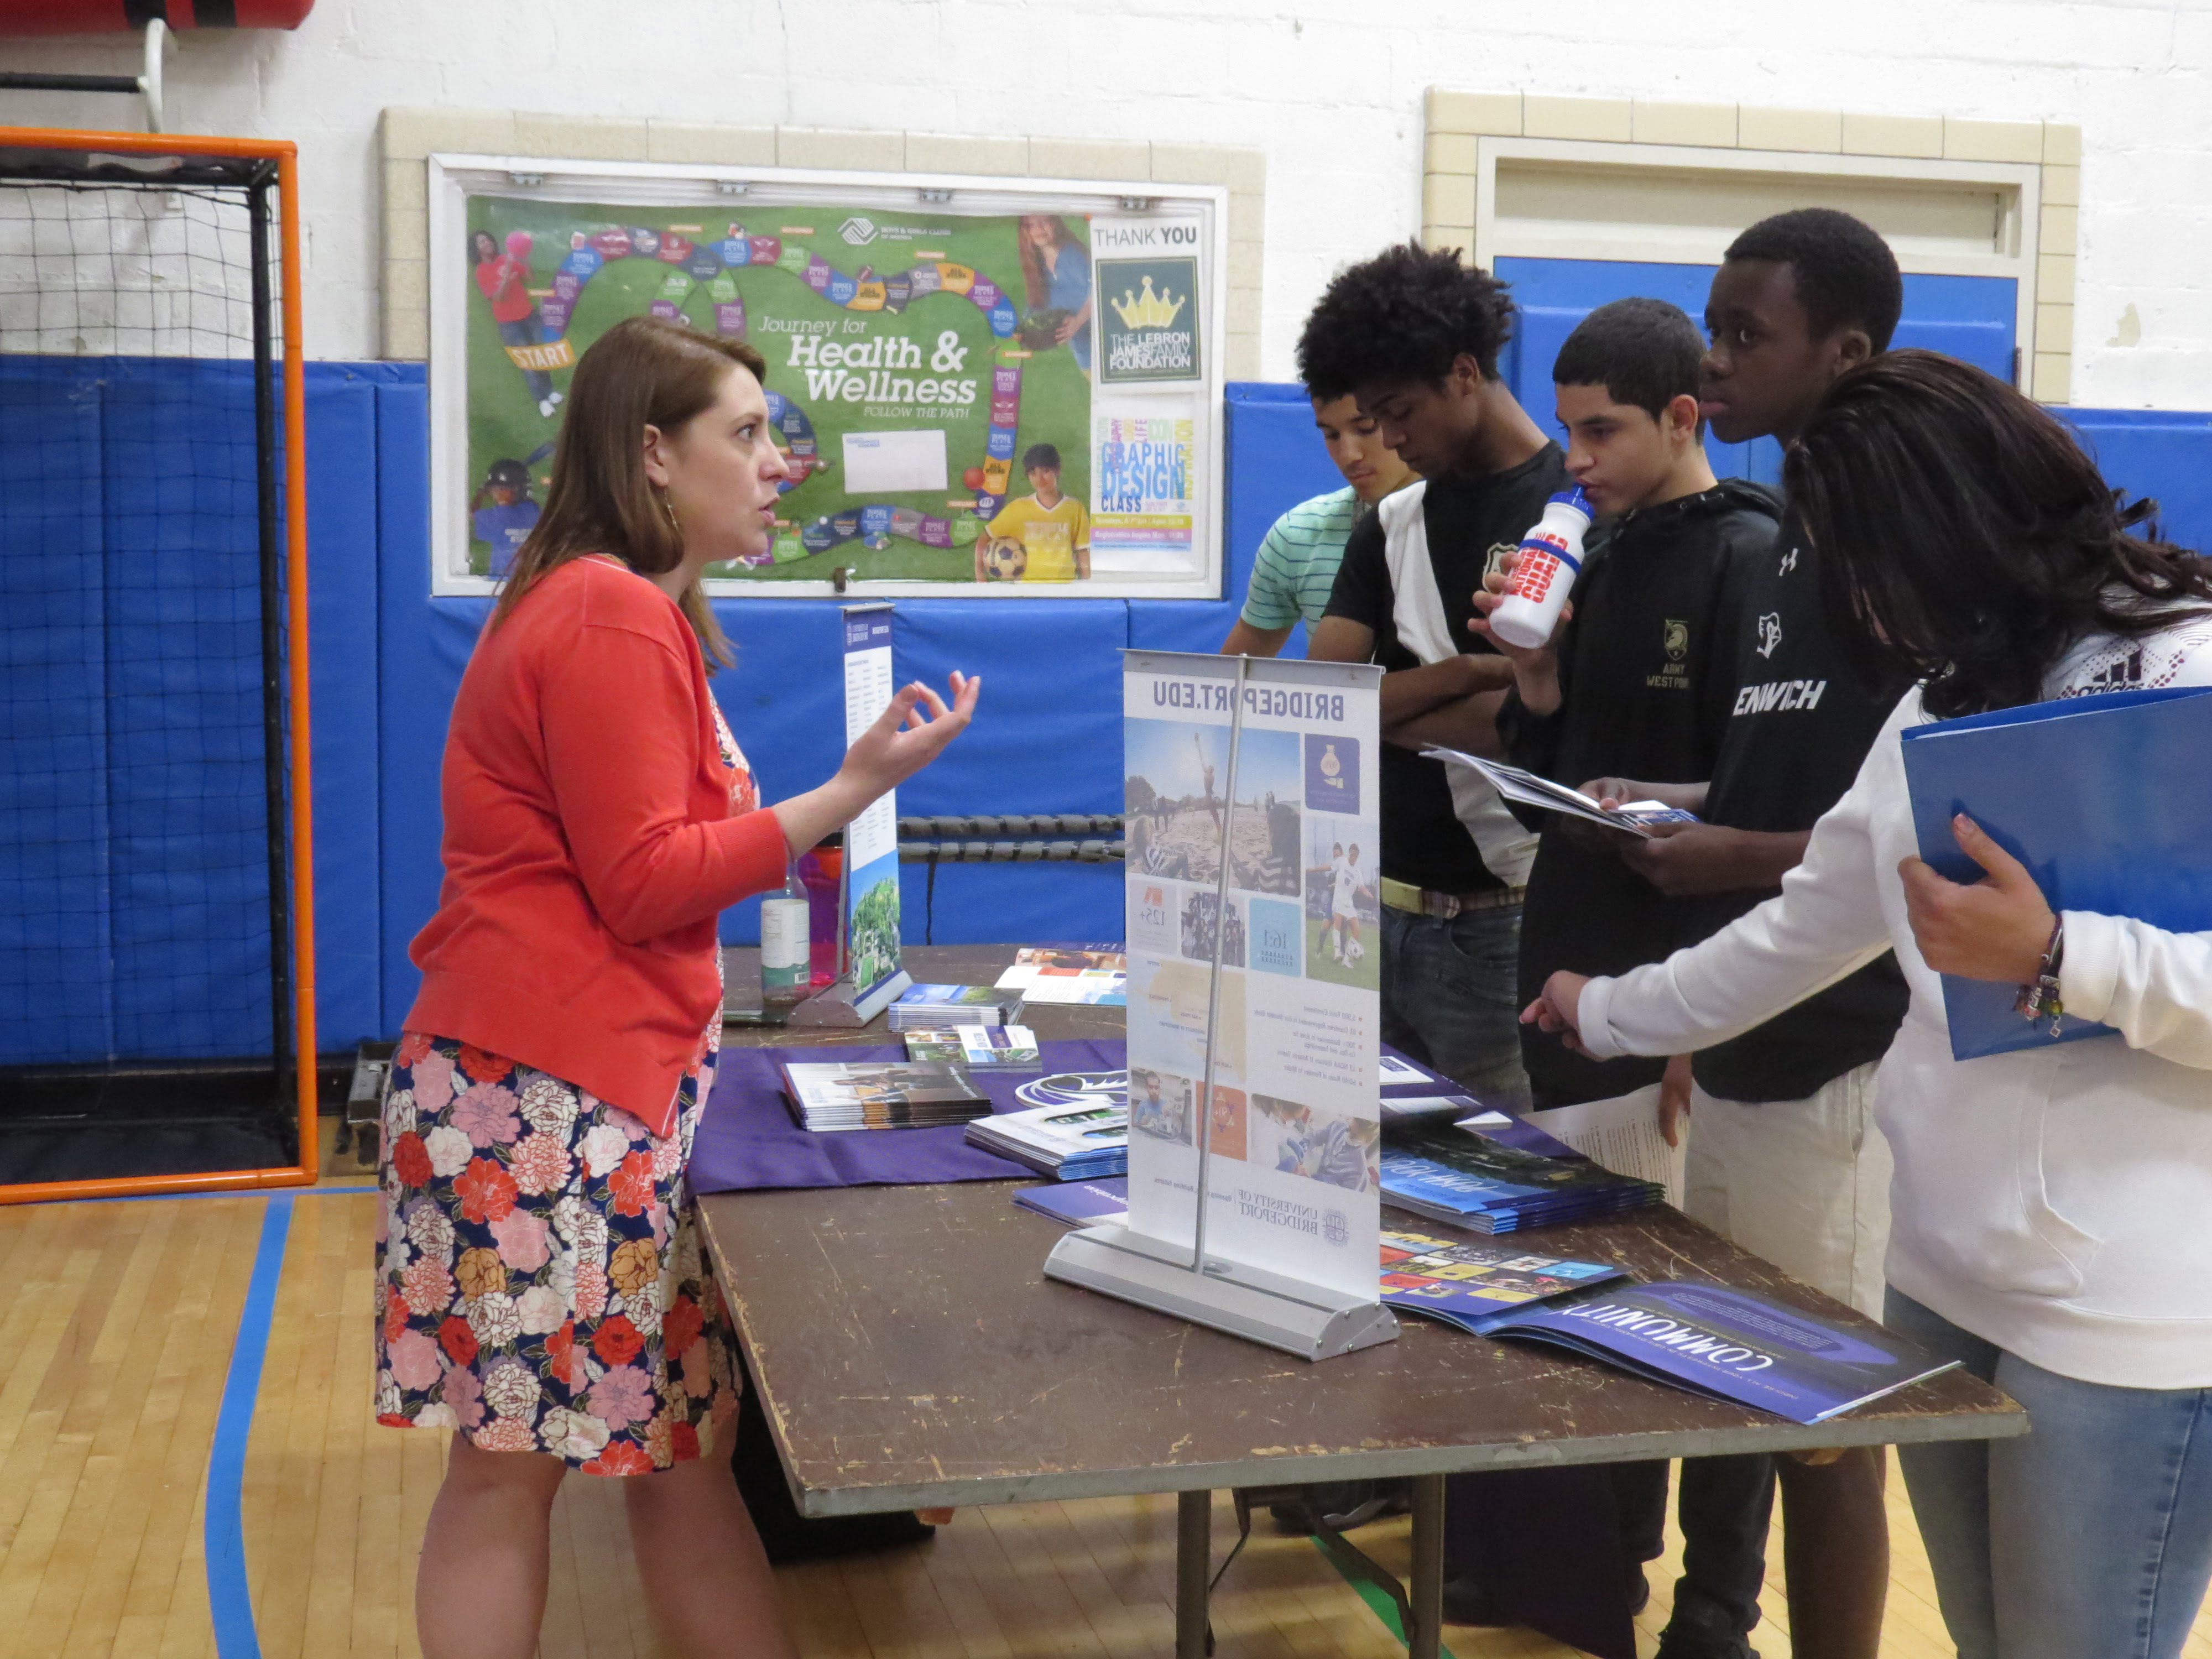 A group of high school students speak with a representative from the University of Bridgeport. May 23, 2017. Photo: Devon Bedoya